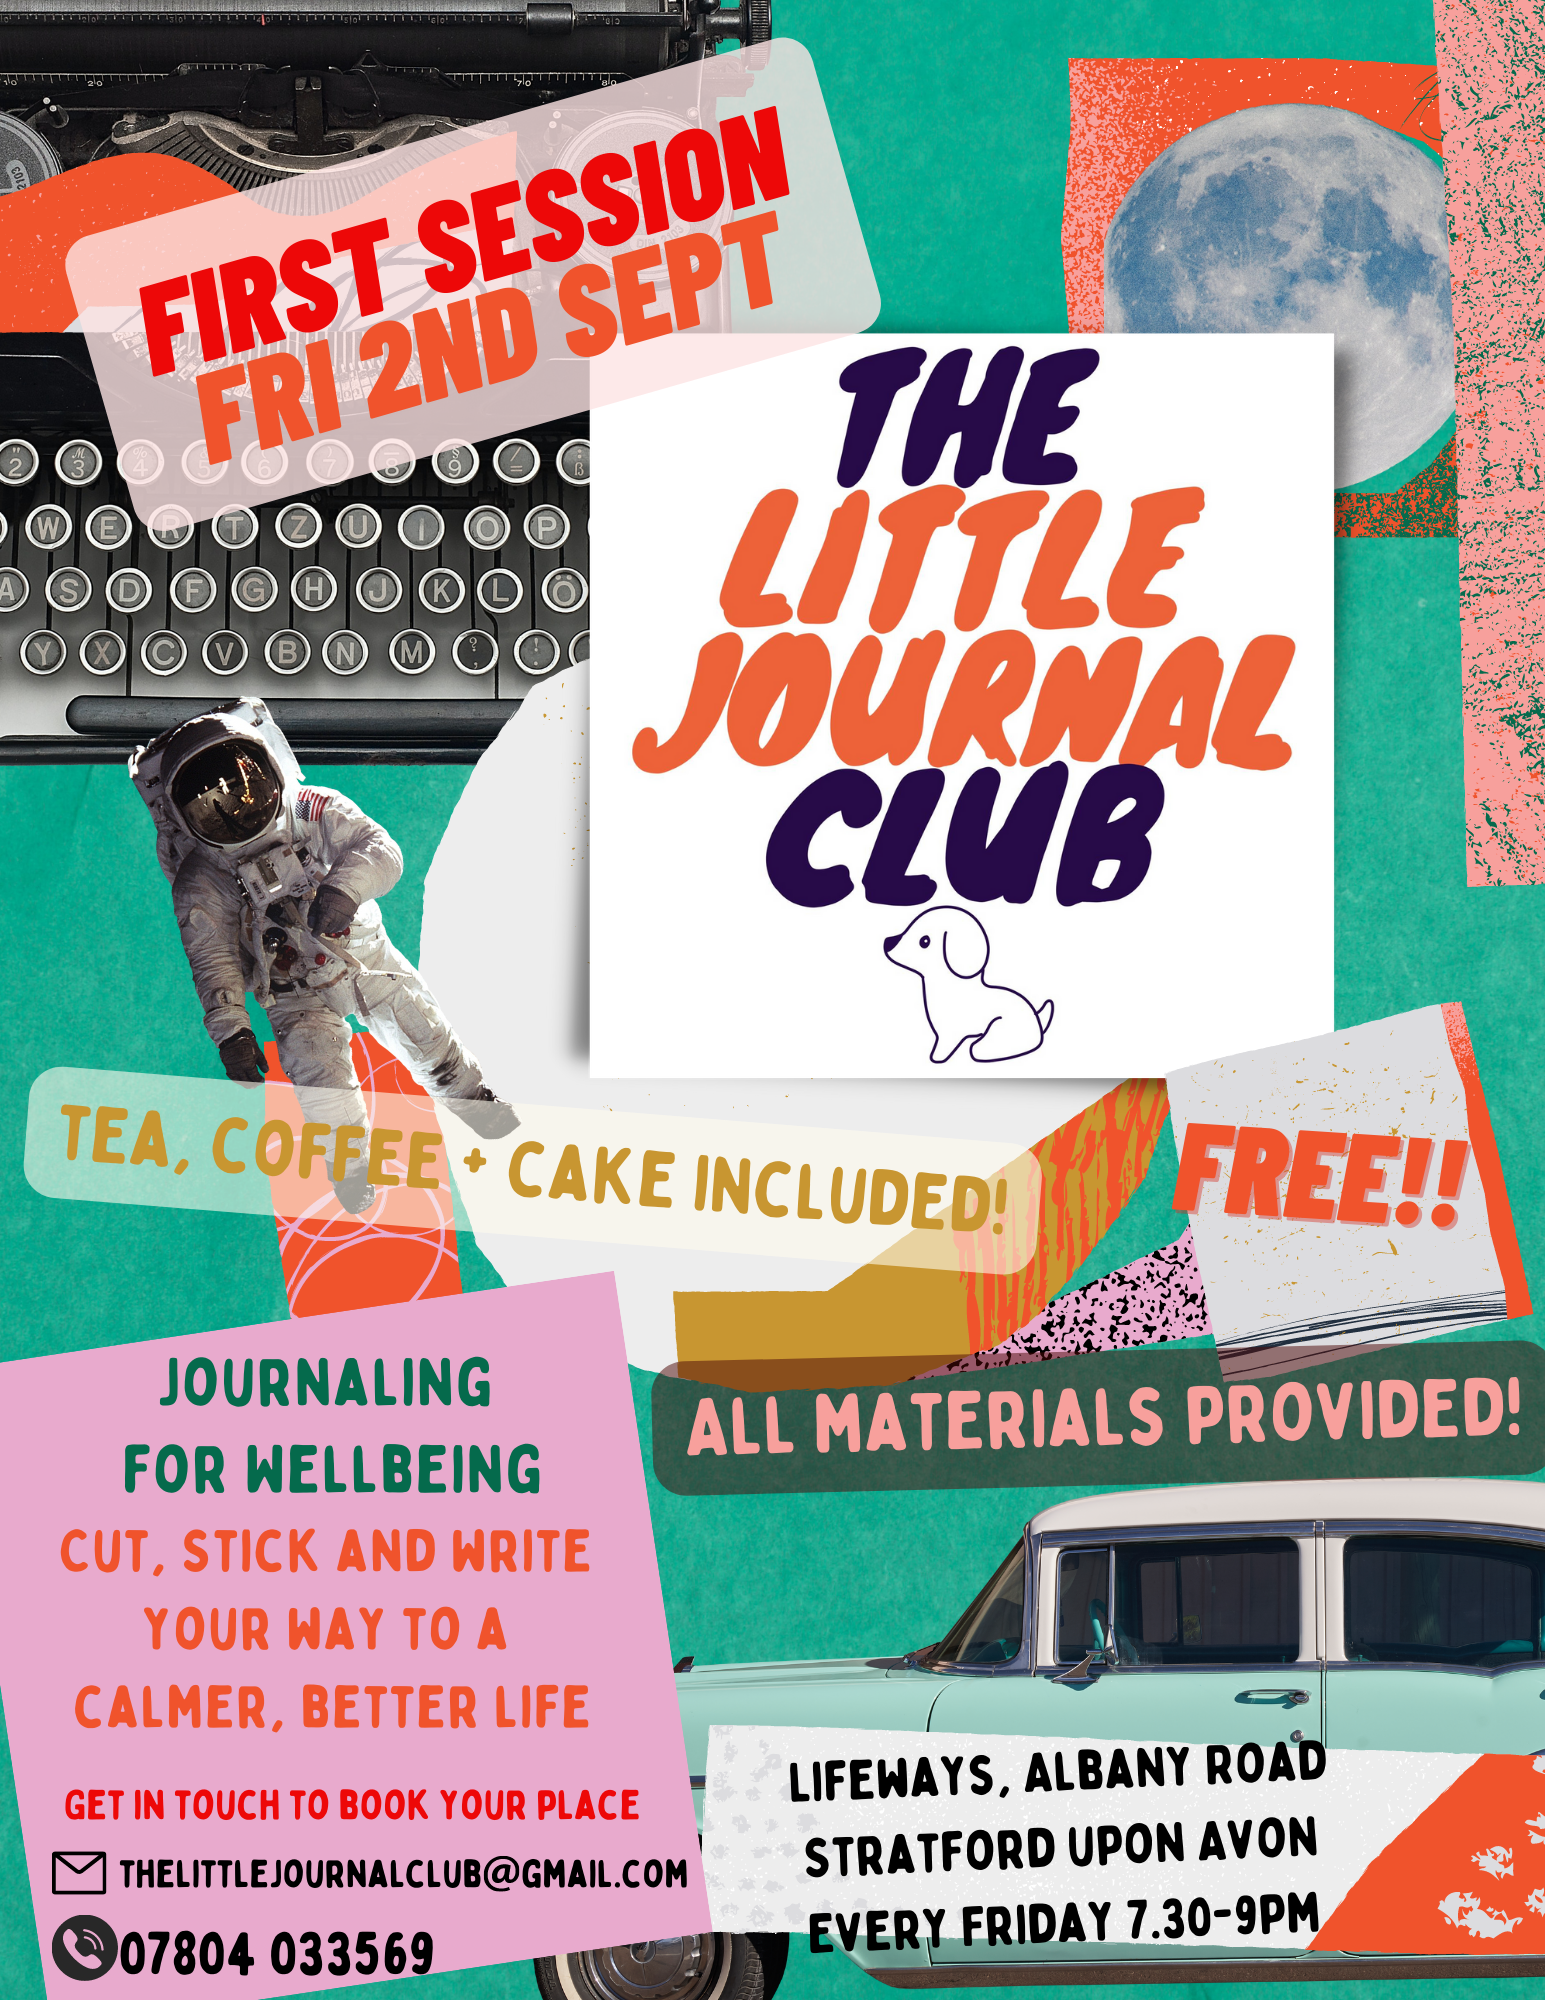 The Little Journal Club